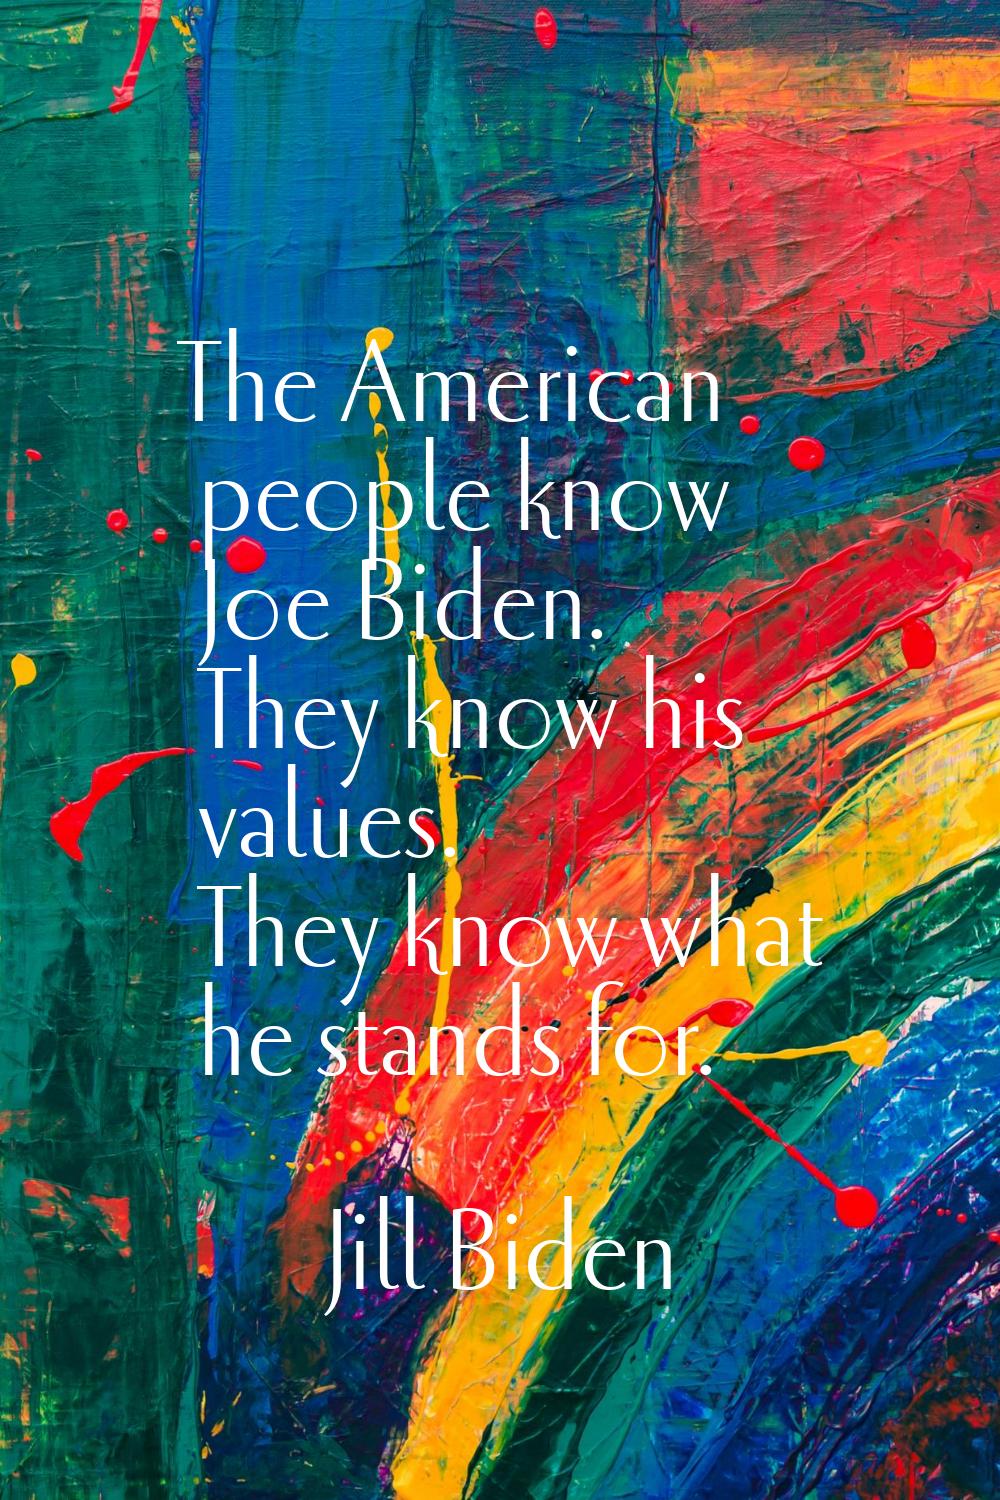 The American people know Joe Biden. They know his values. They know what he stands for.